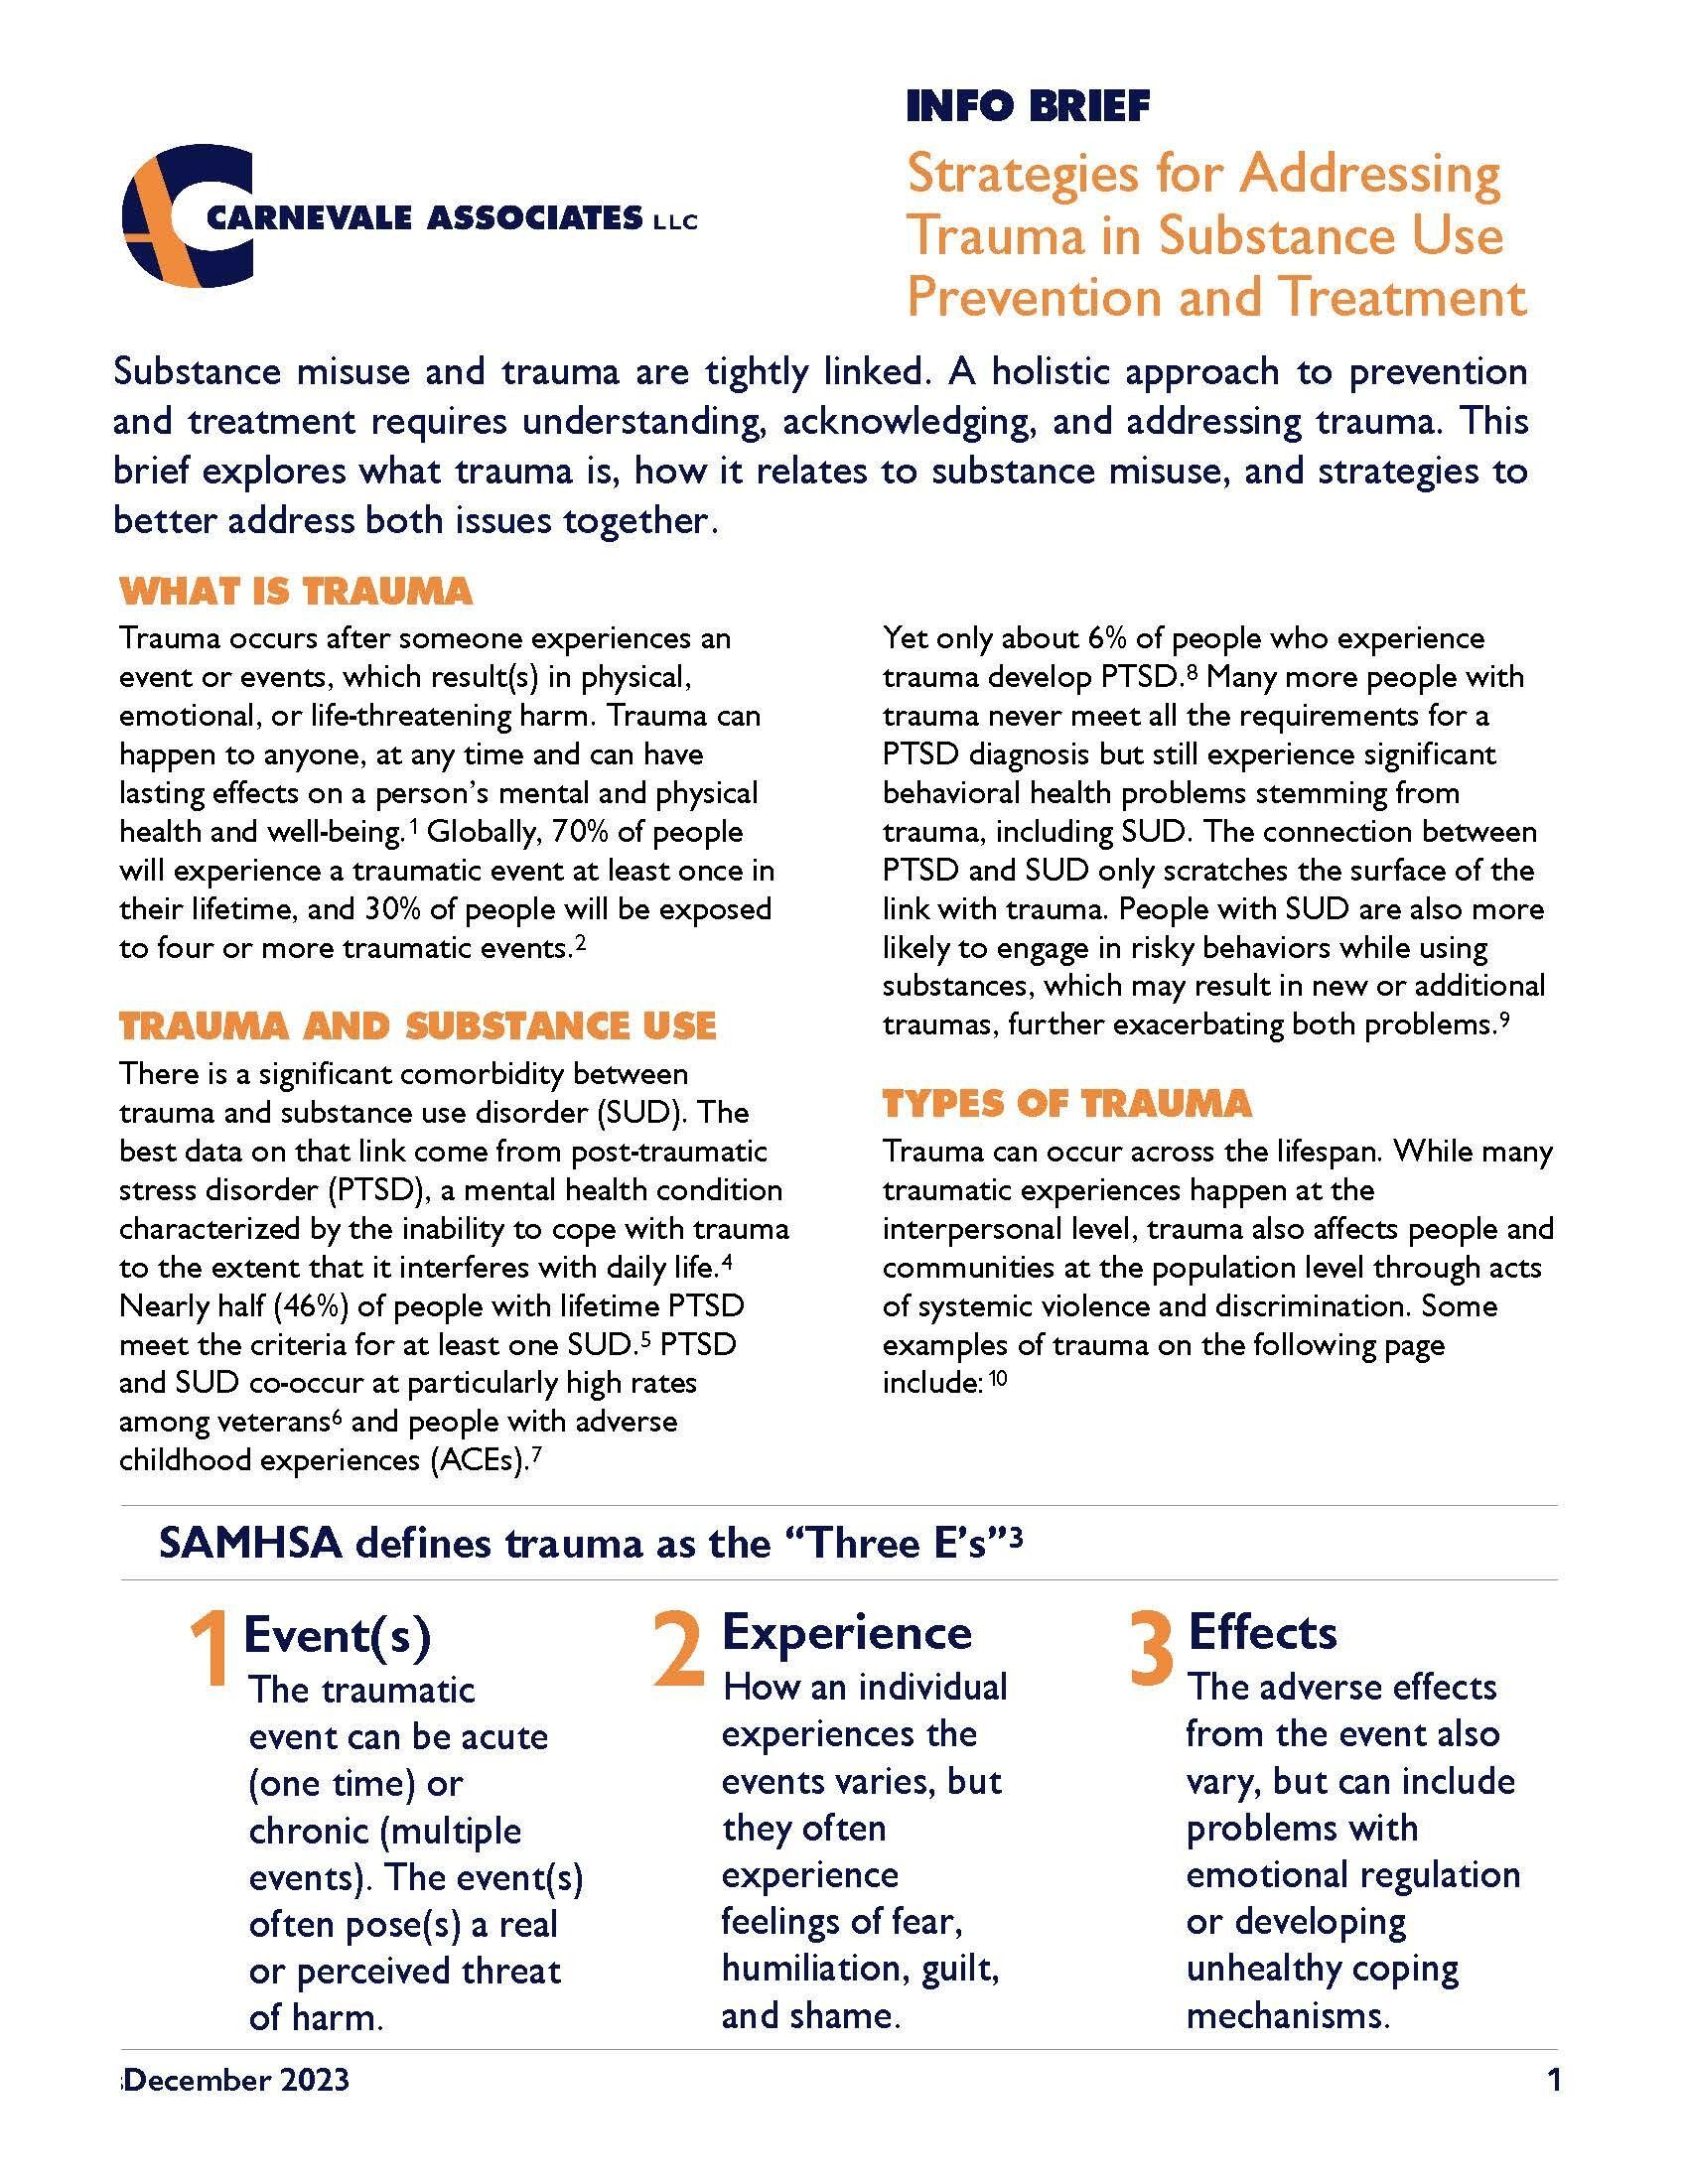 Strategies for Addressing Trauma in Substance Use Prevention and Treatment